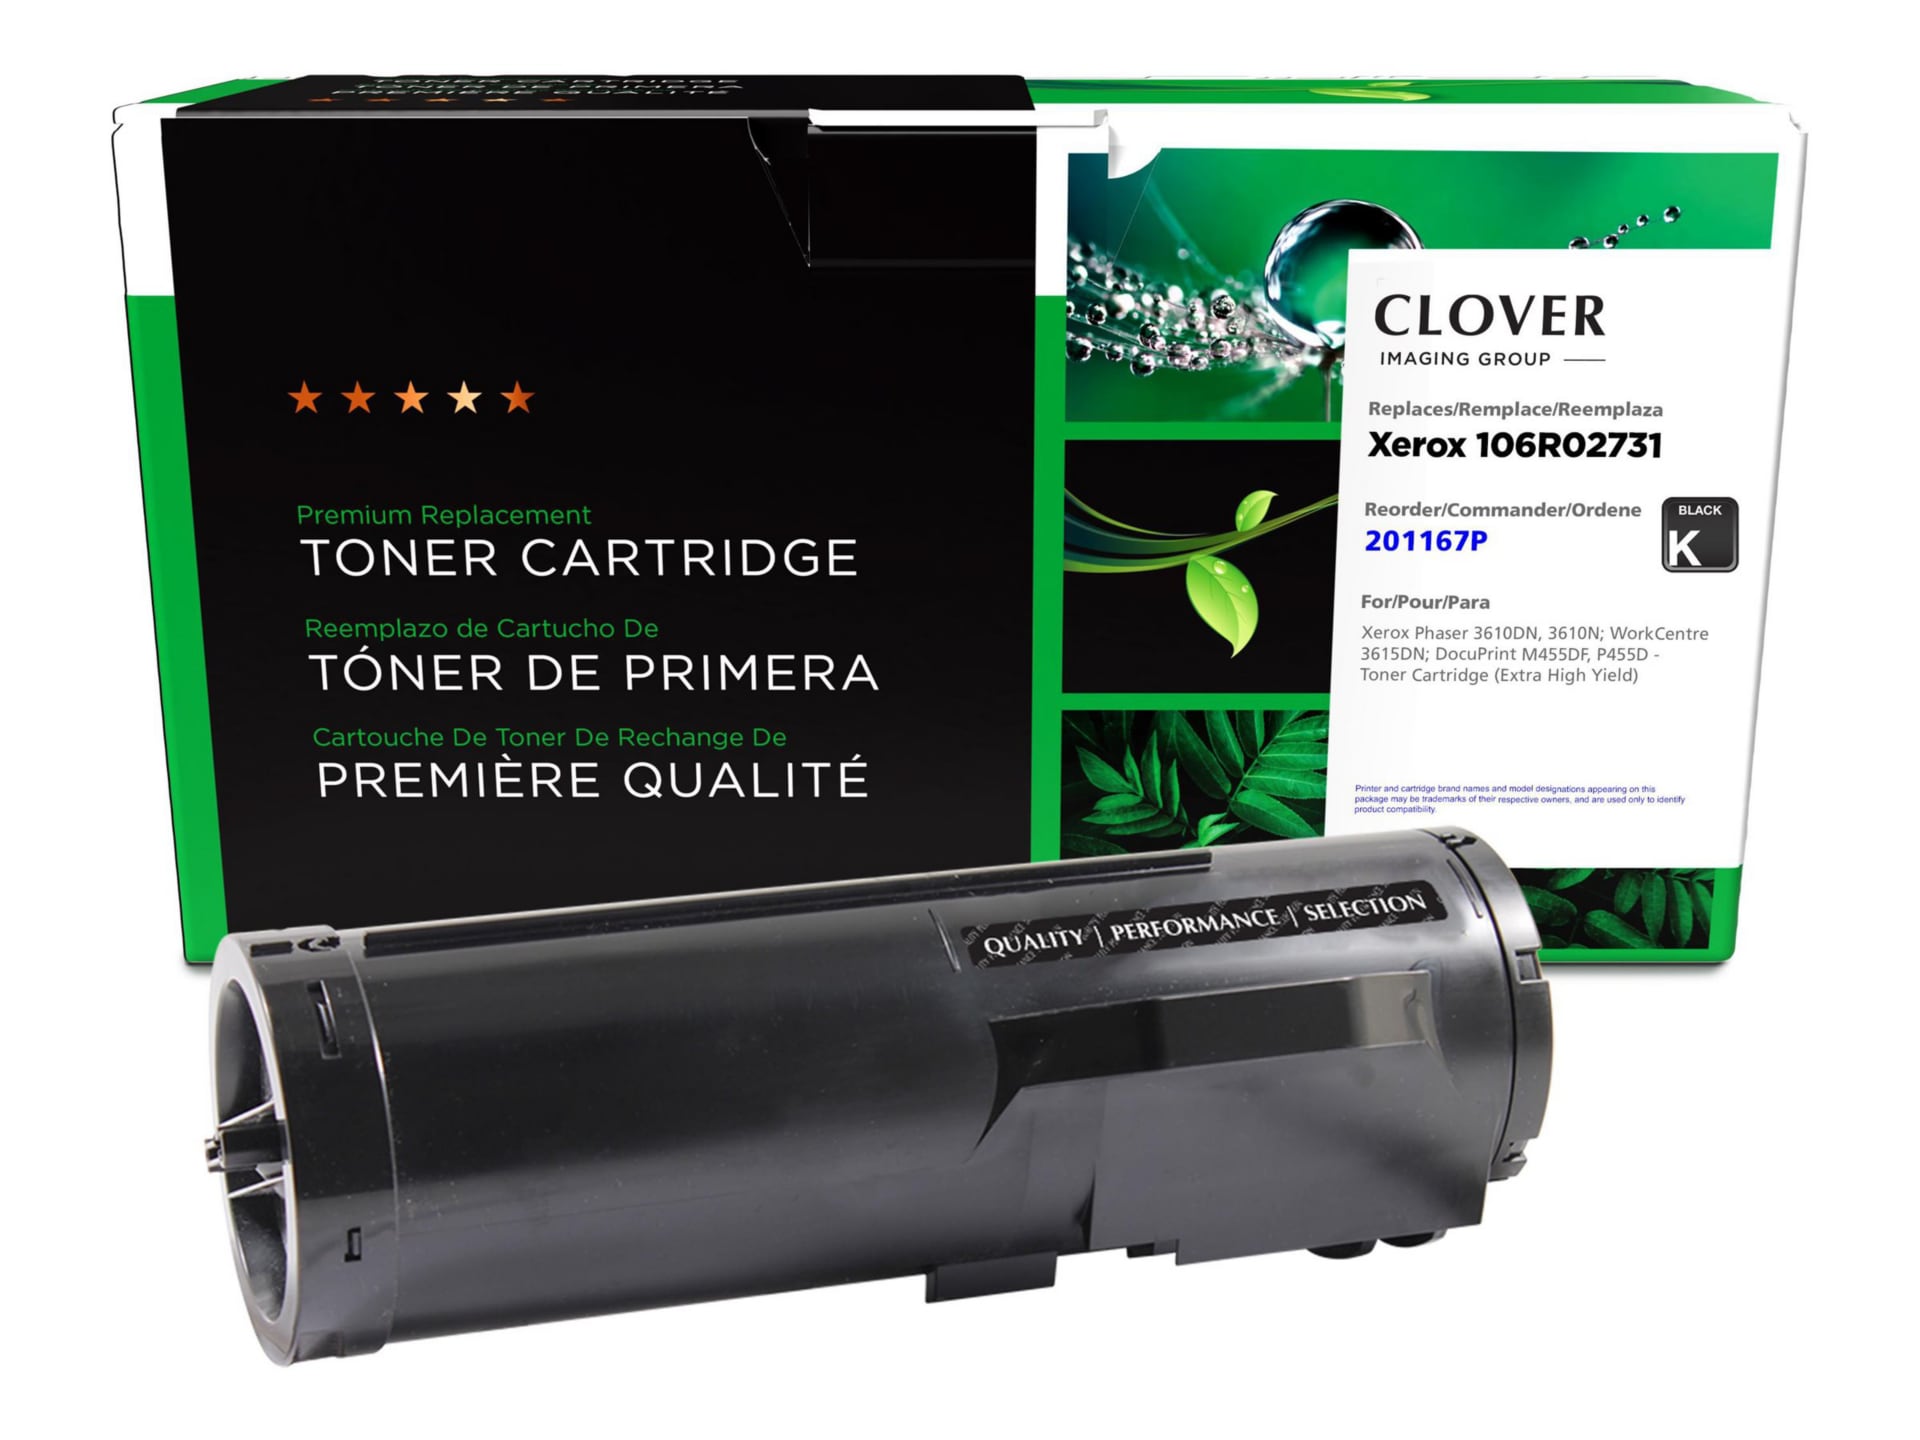 Clover Imaging Group - High Yield - black - compatible - remanufactured - t